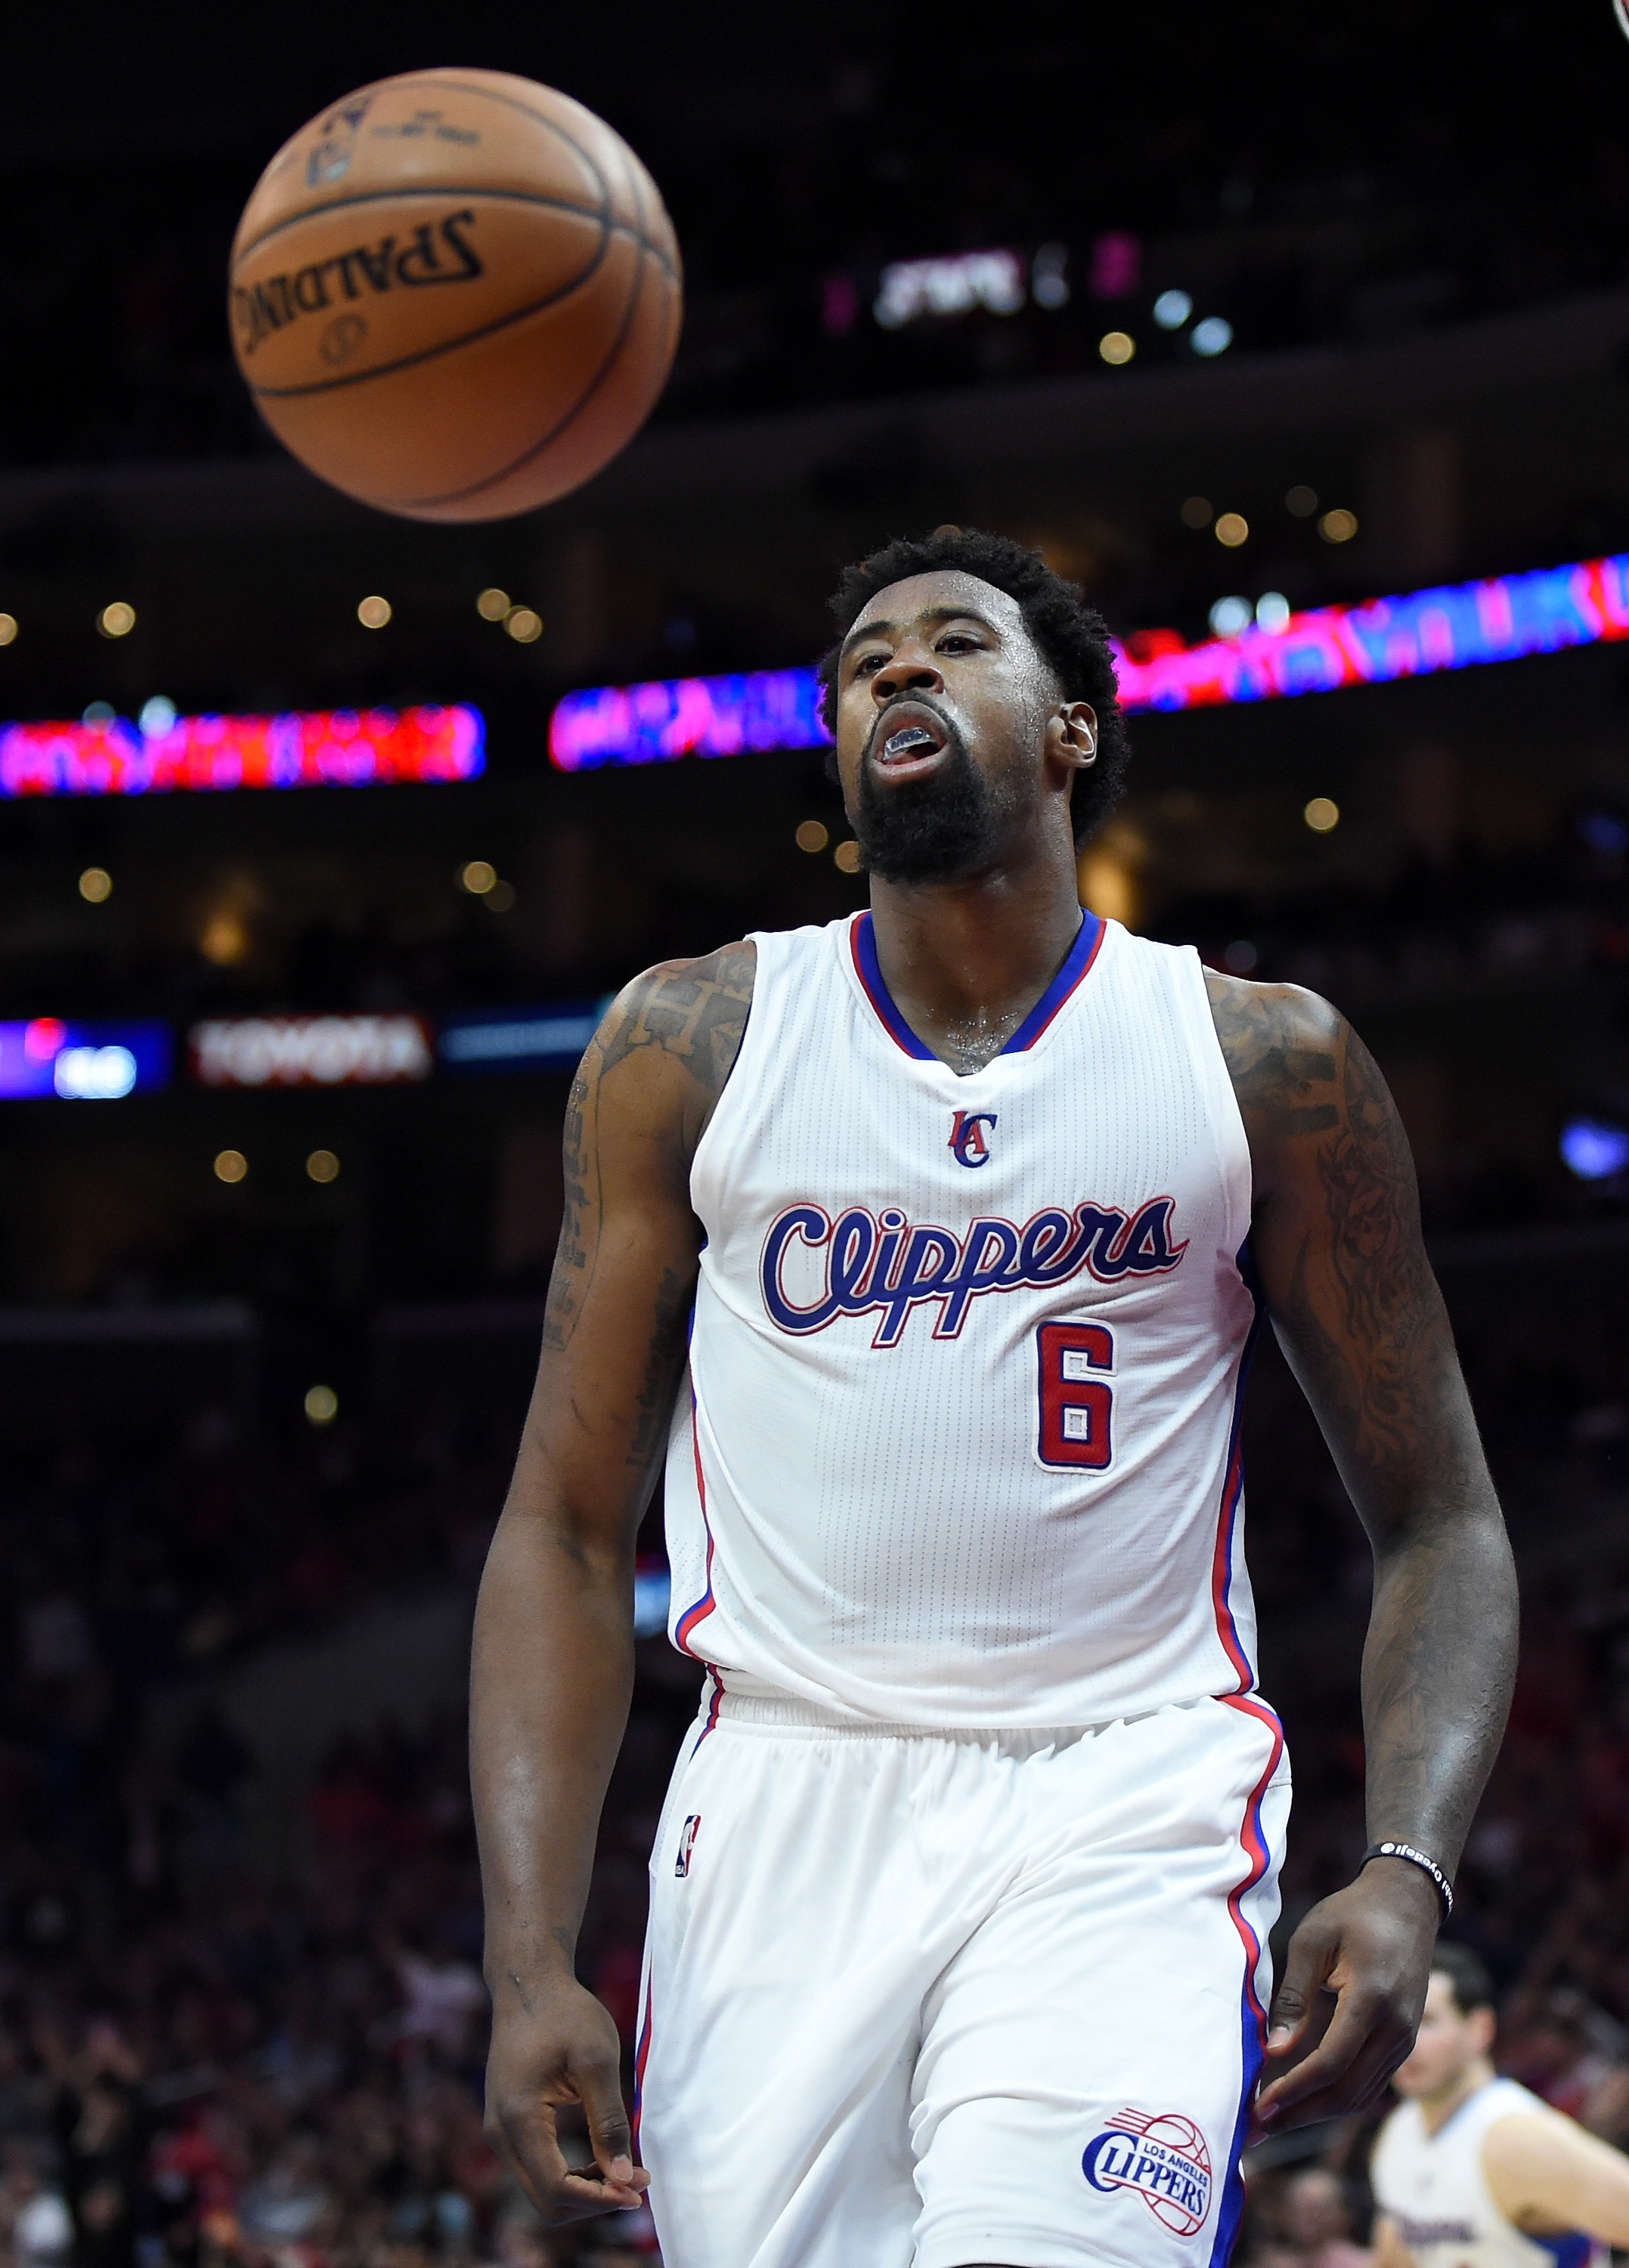 LOS ANGELES, CA - APRIL 13:  DeAndre Jordan #6 of the Los Angeles Clippers reacts after his dunk during a 110-103 win over the Denver Nuggets at Staples Center on April 13, 2015 in Los Angeles, California.  NOTE TO USER: User expressly acknowledges and agrees that, by downloading and or using this Photograph, user is consenting to the terms and condition of the Getty Images License Agreement.  (Photo by Harry How/Getty Images)